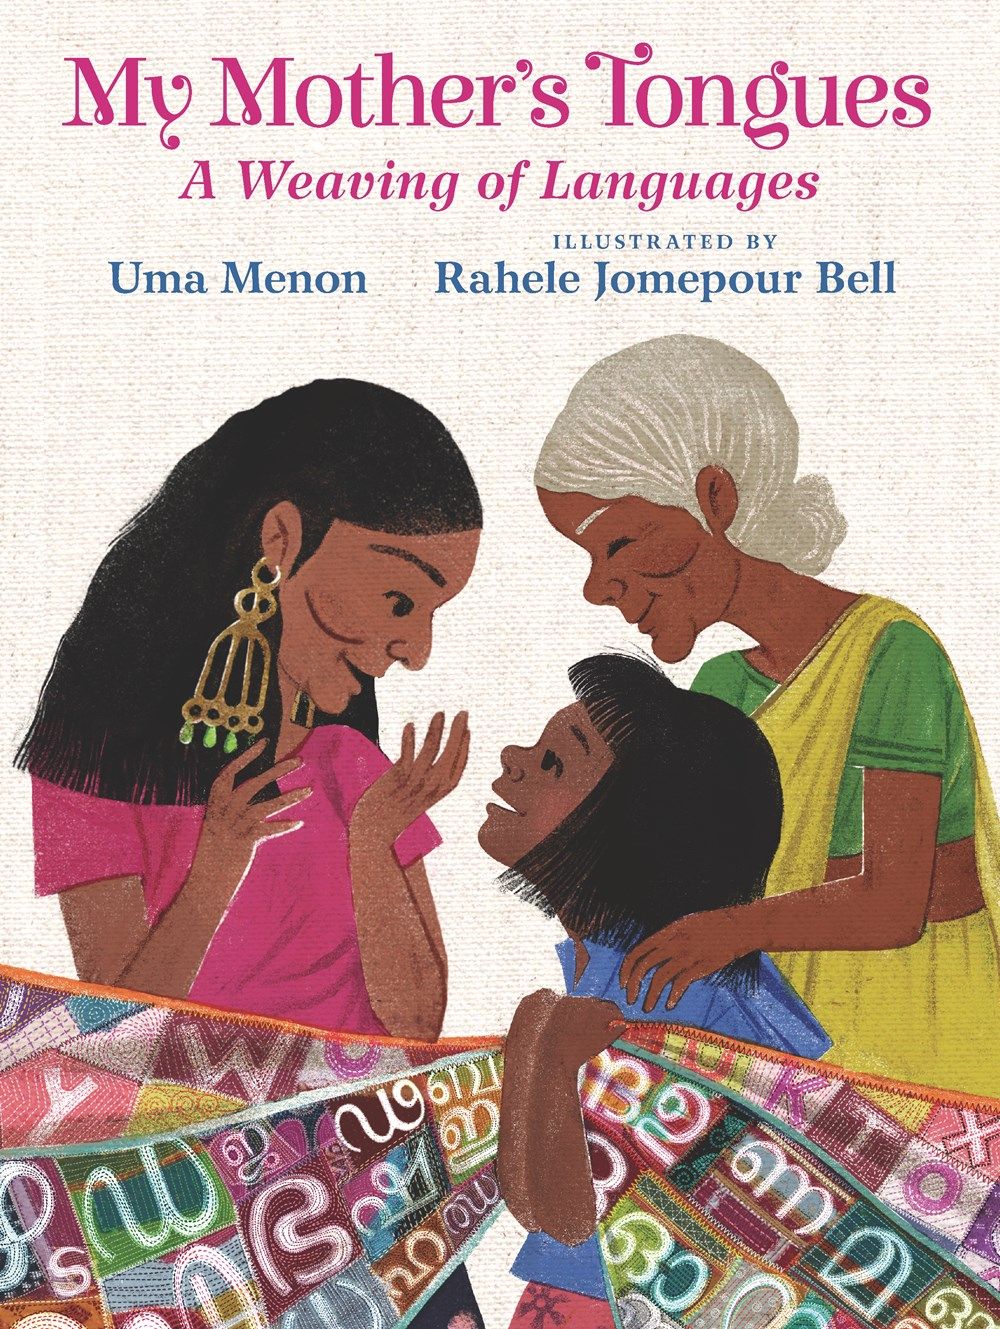 Cover of My Mother's Tongues: A Weaving of Languages by Uma Menon, illustrated by Rahele Jomepour Bell